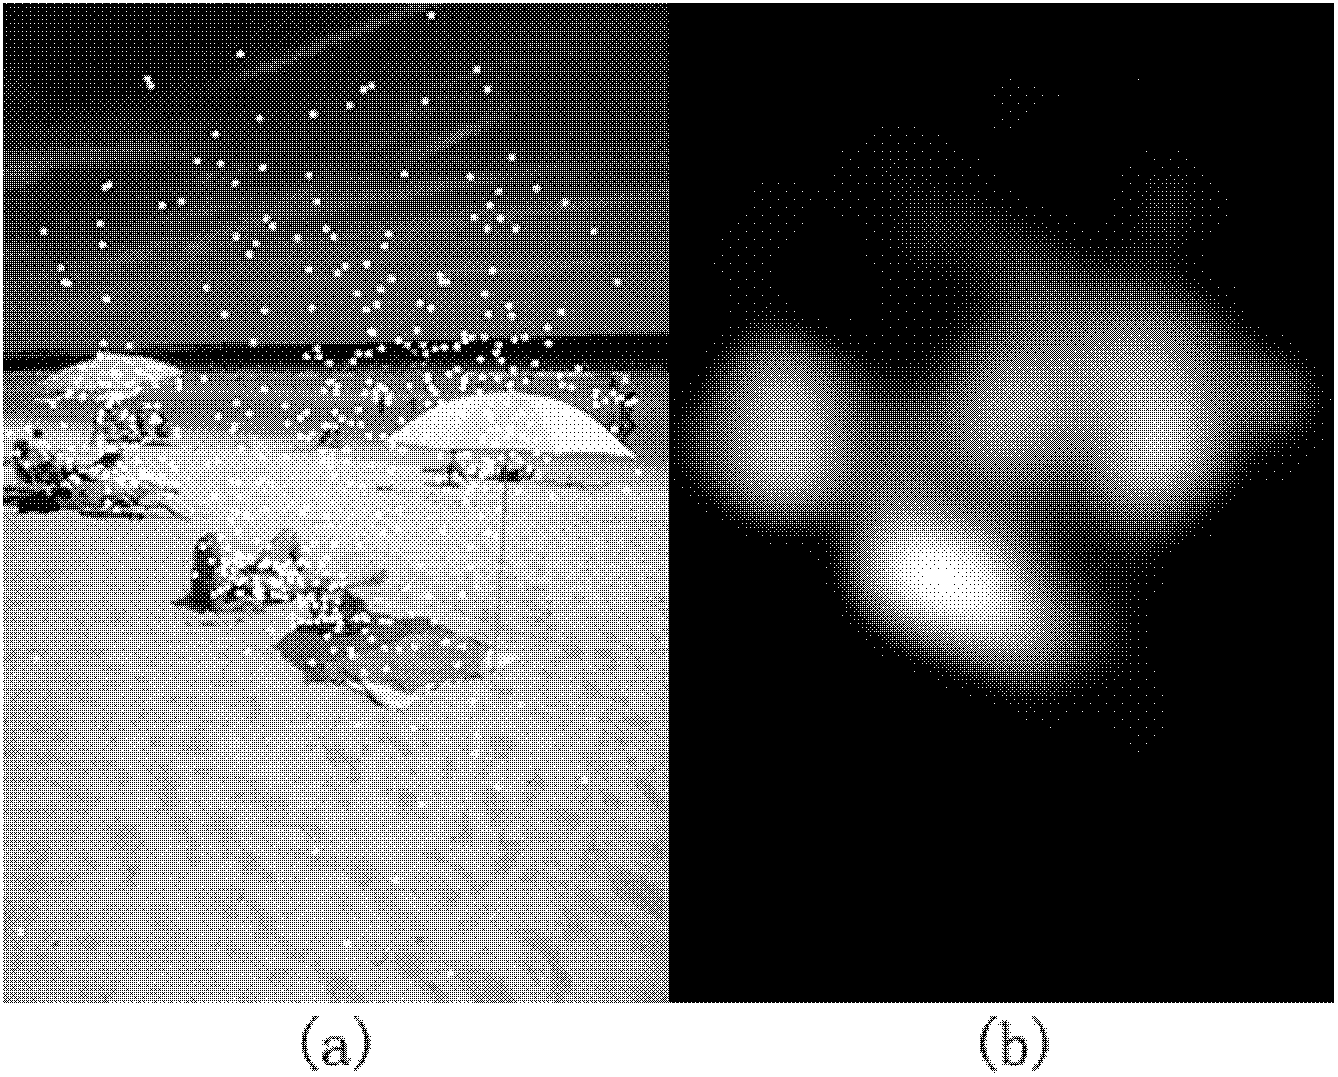 Method for extracting image region of interest based on eye movement data and bottom-layer features